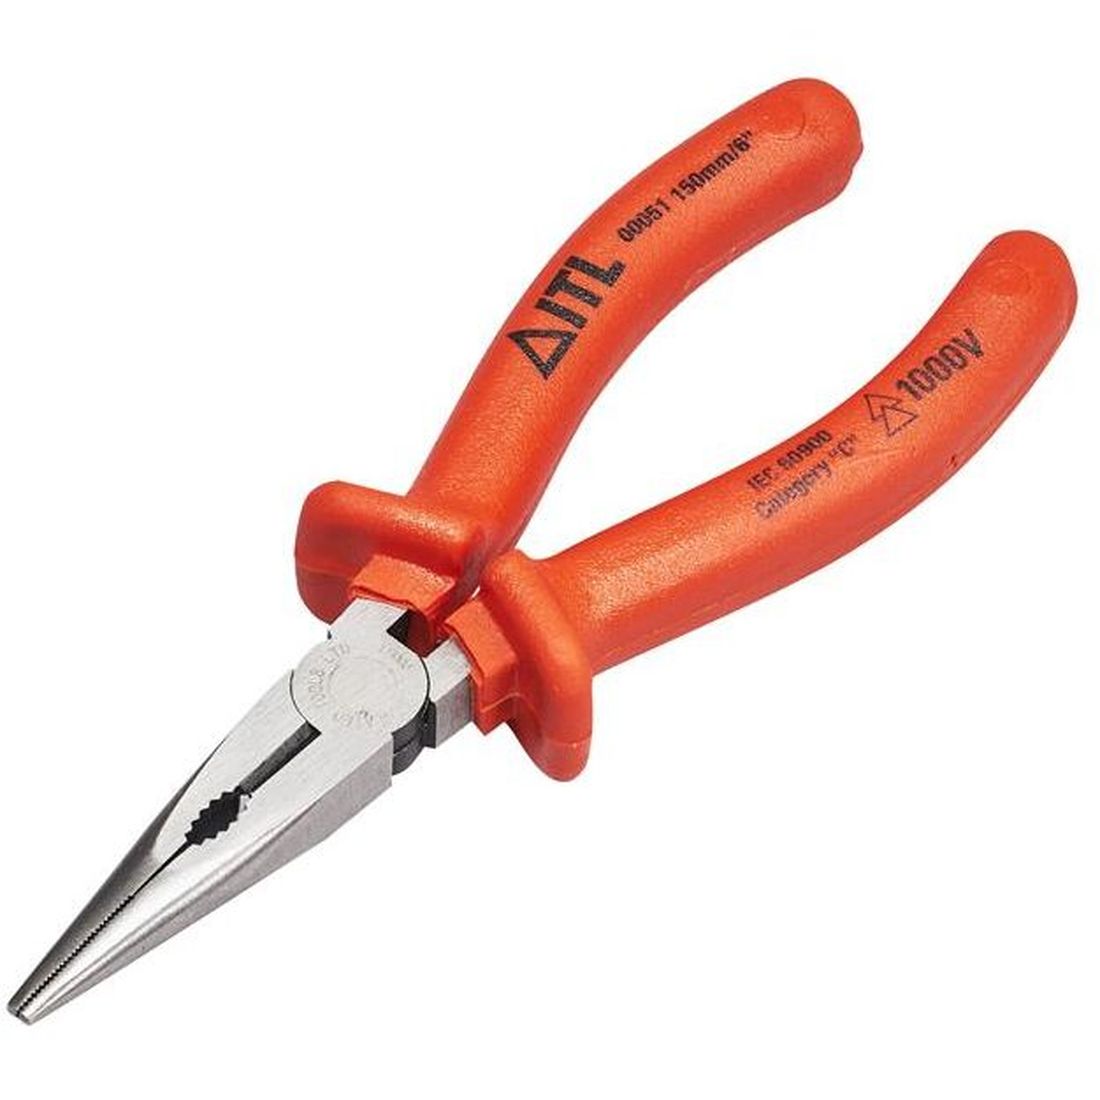 ITL Insulated Insulated Snipe Nose Pliers 150mm 